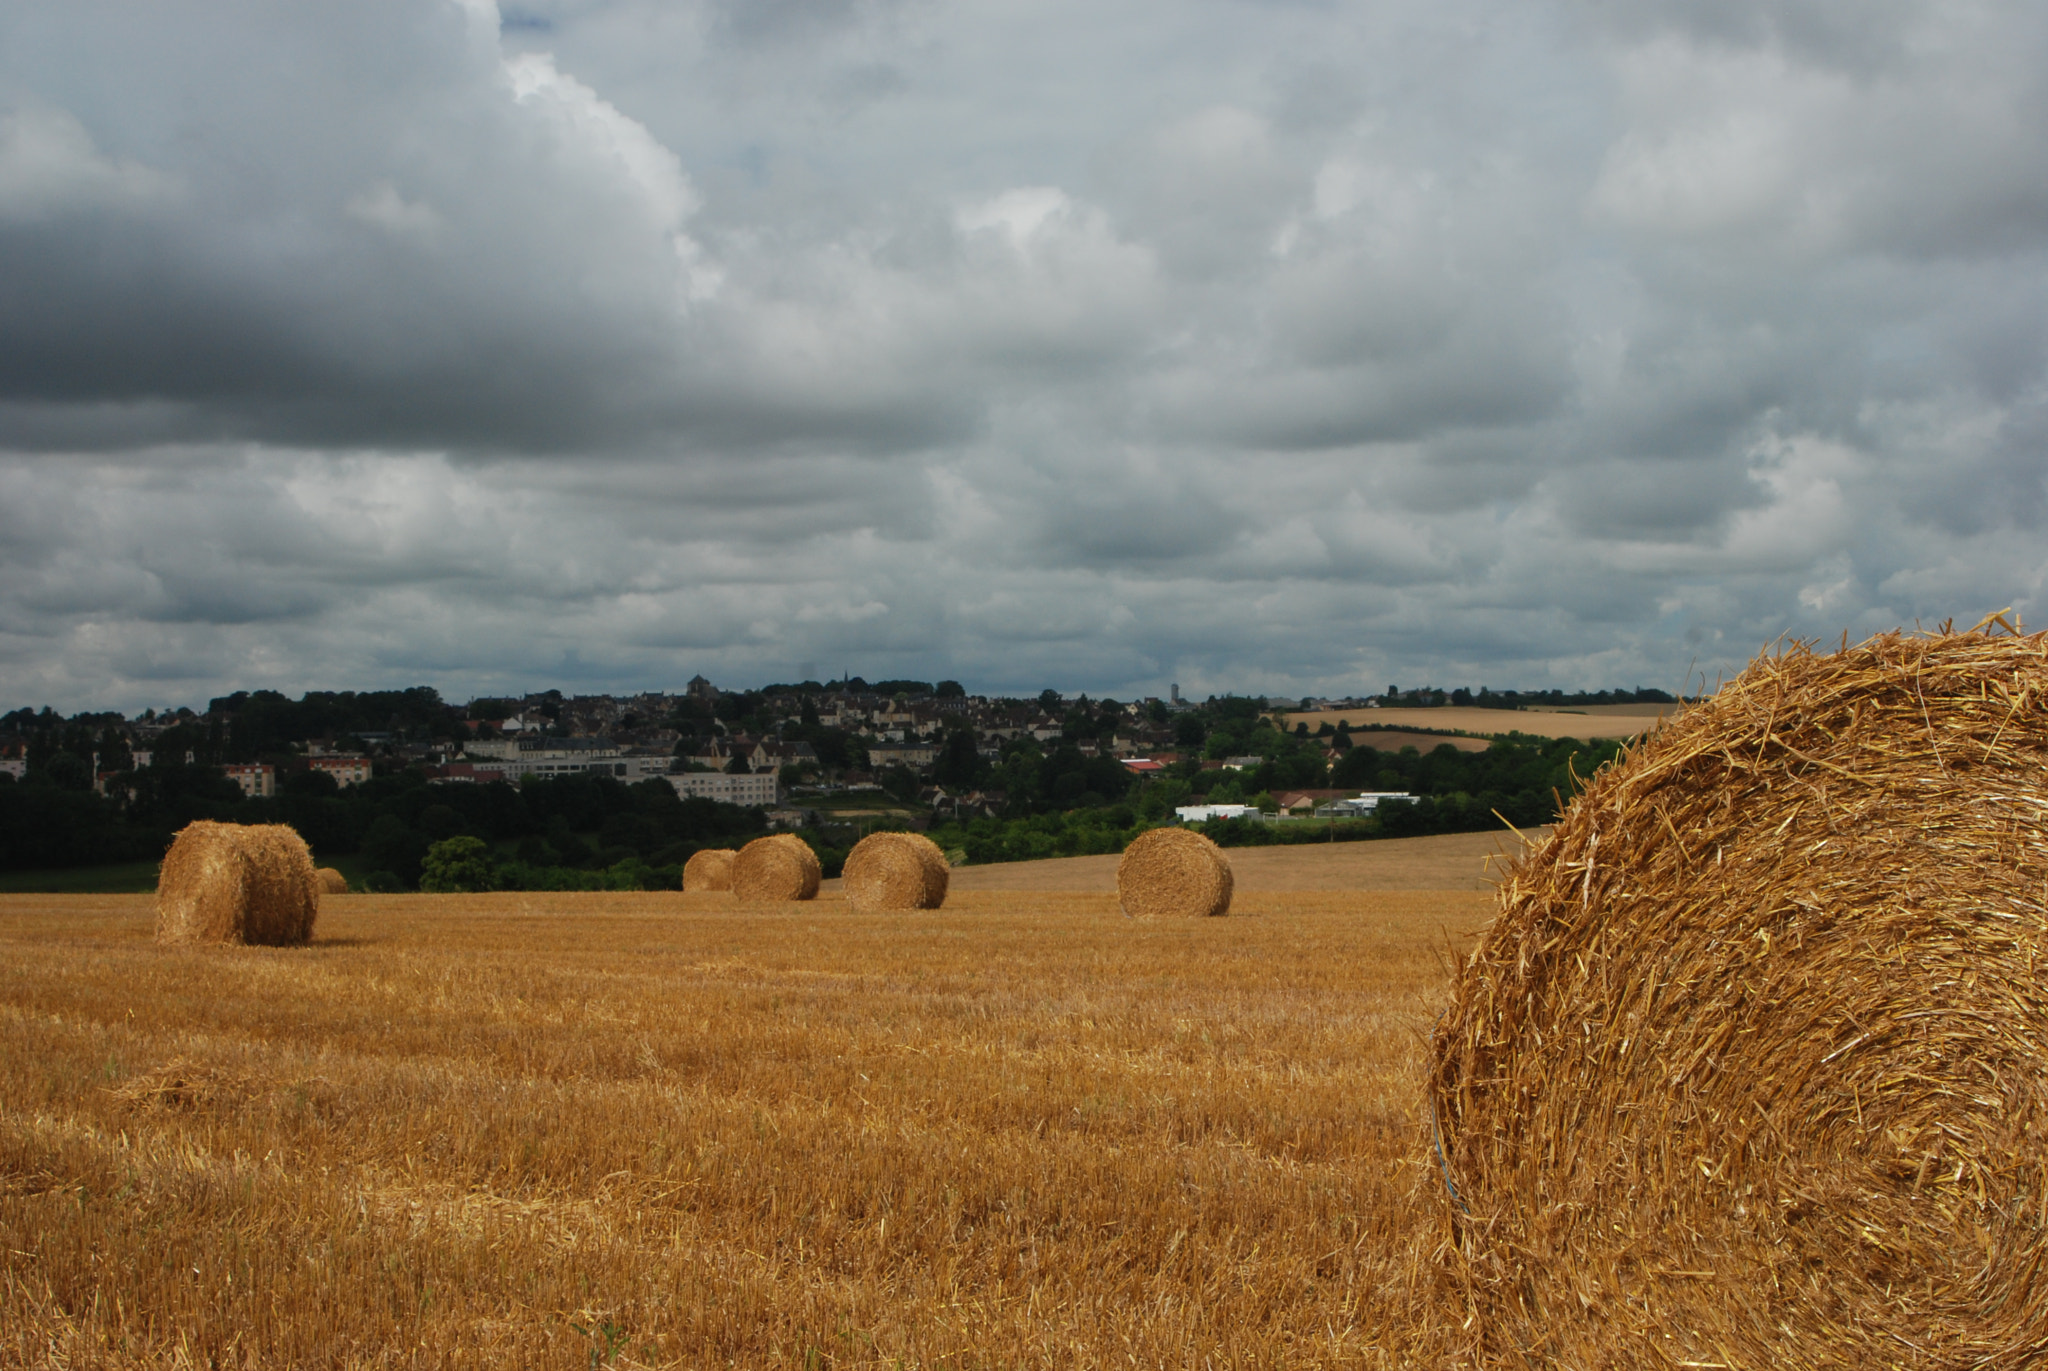 AF Zoom-Nikkor 28-80mm f/3.5-5.6D sample photo. Hay bales in a cloudy morning photography